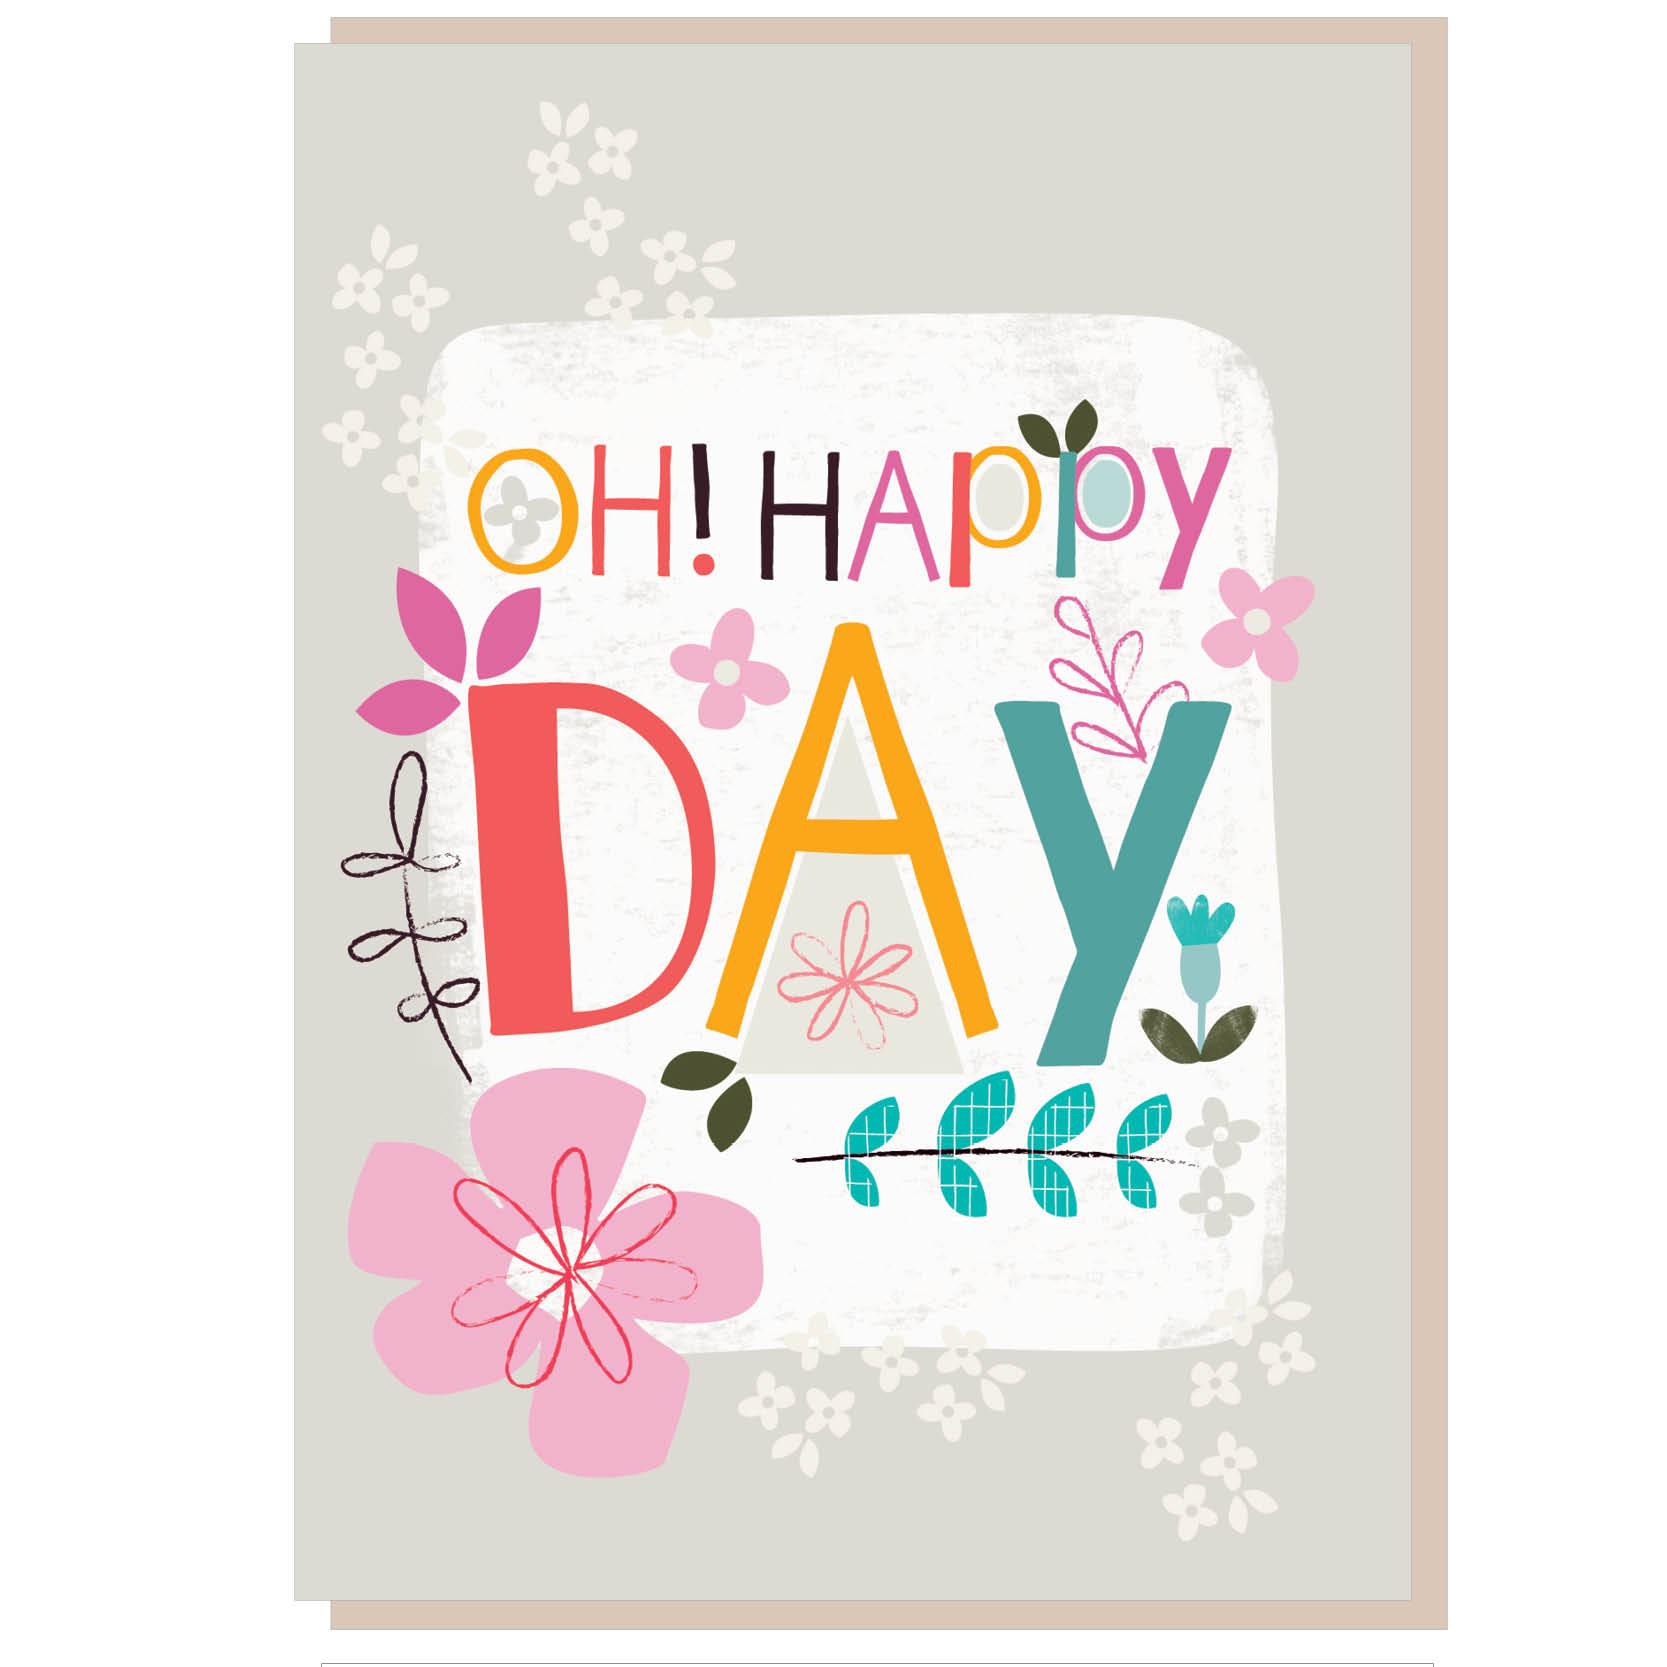 Oh Happy day Greetings Card | Free Delivery when you spend £10 at Eden ...